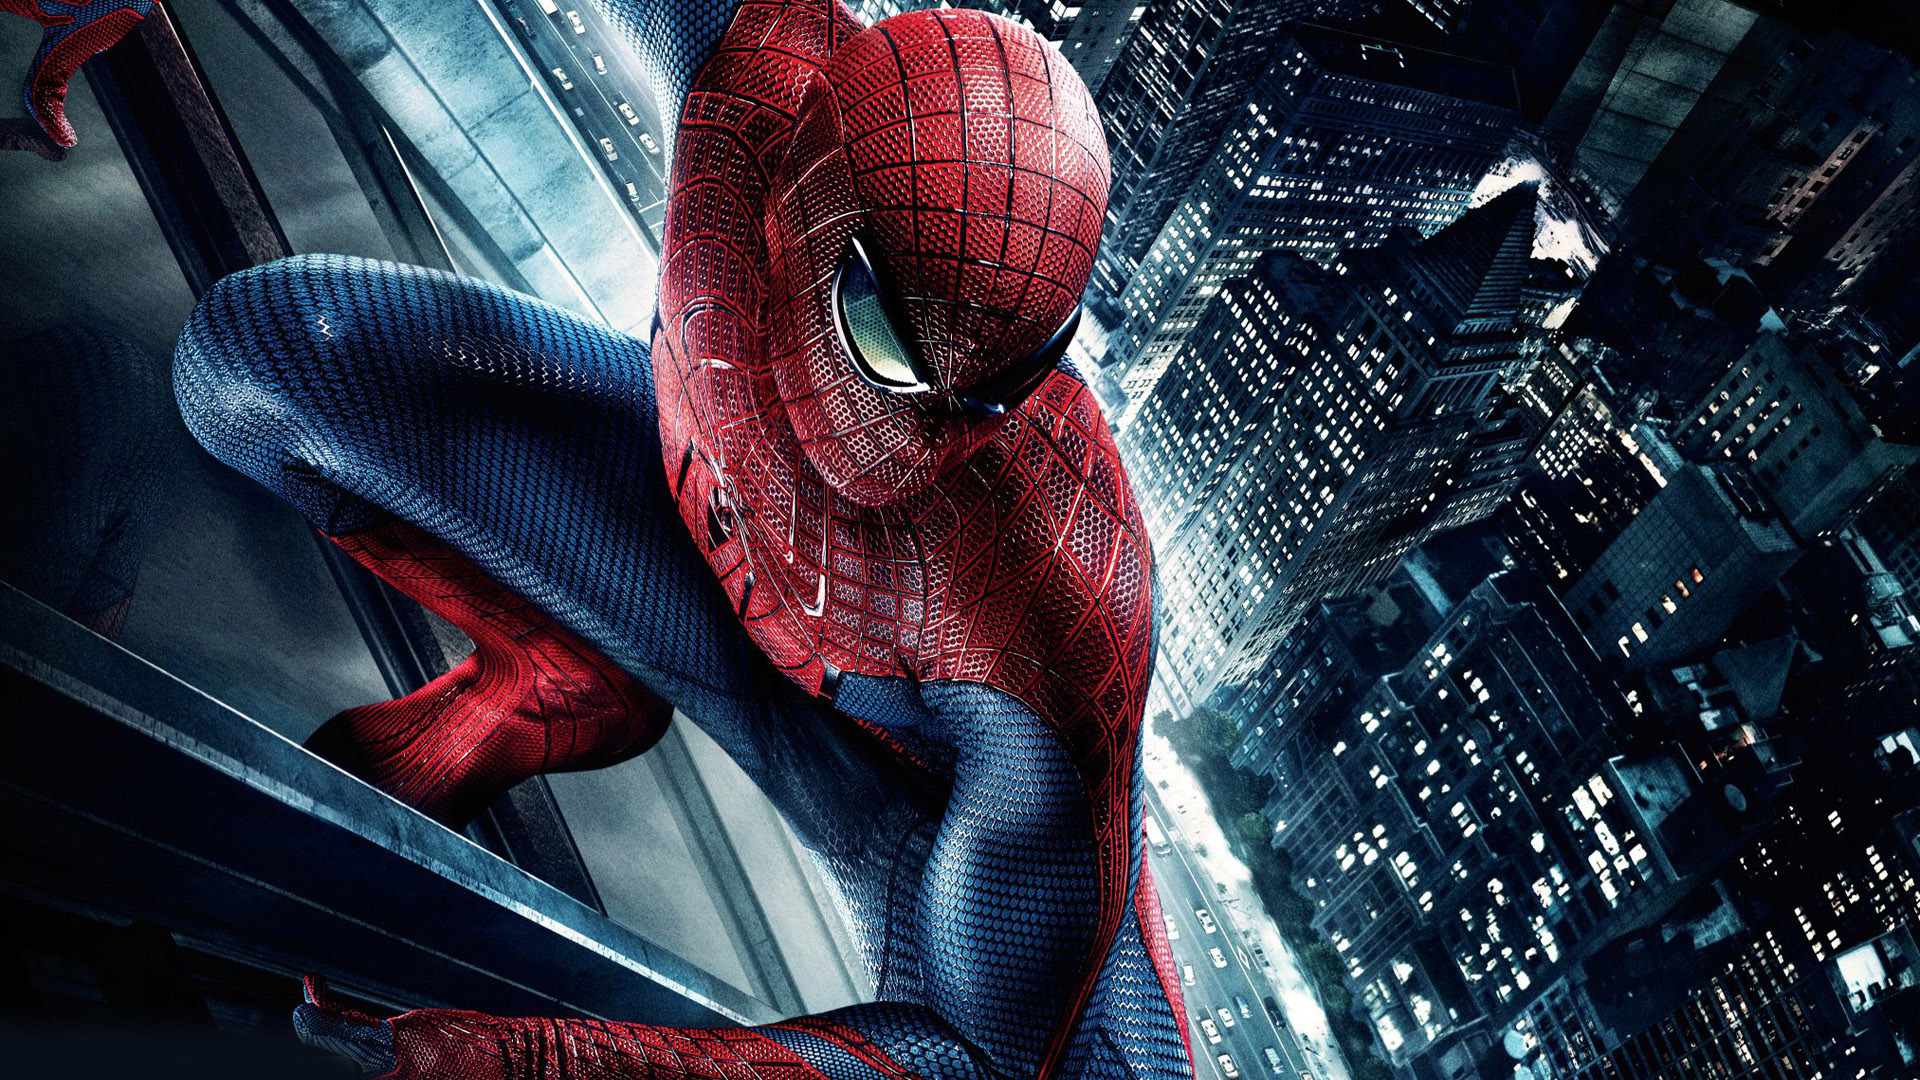 The Amazing Spider-Man Wallpapers